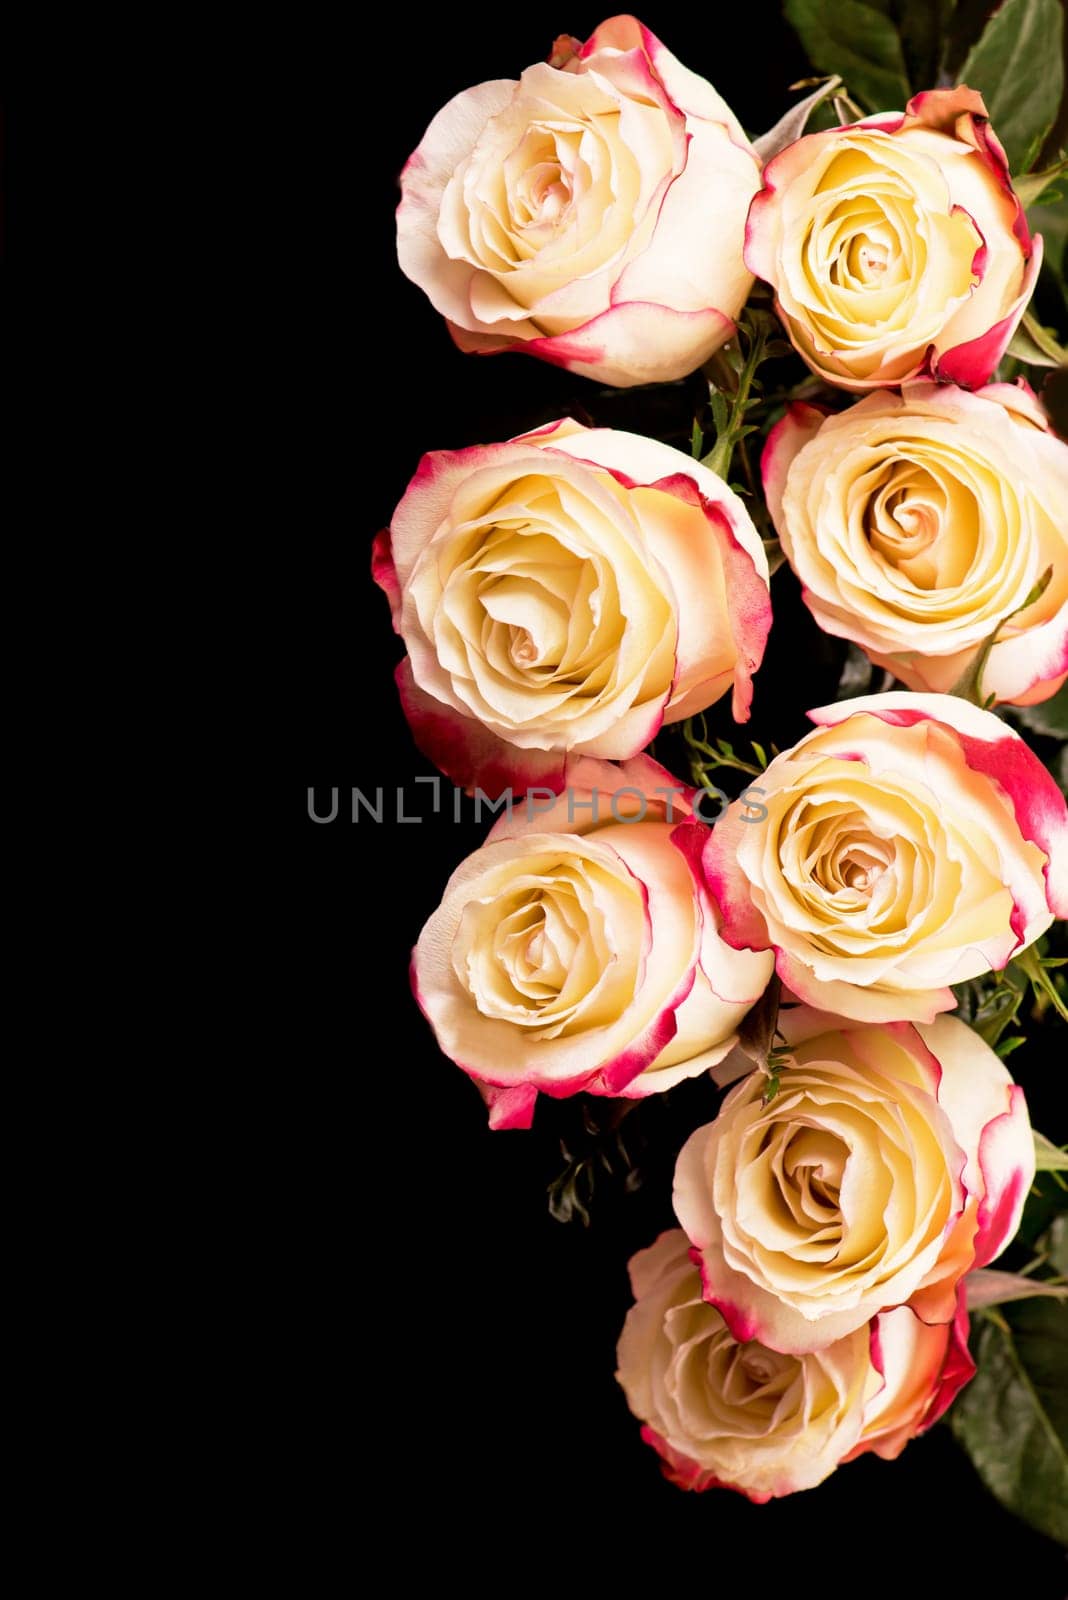 Large bouquet of pink roses on a black background